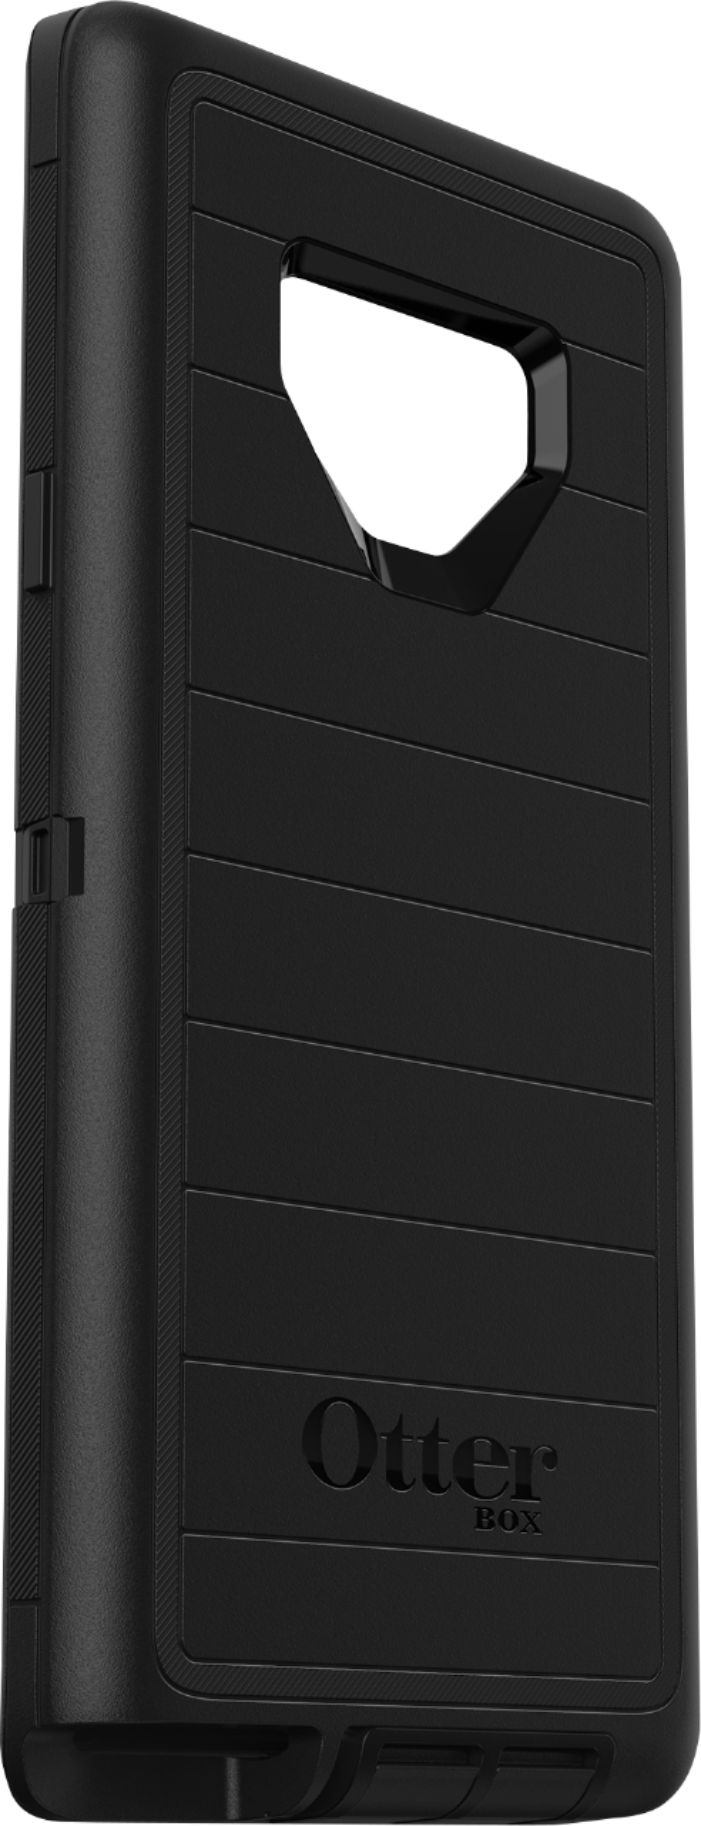 Angle View: OtterBox - Defender Series Pro Case for Samsung Galaxy Note9 - Black